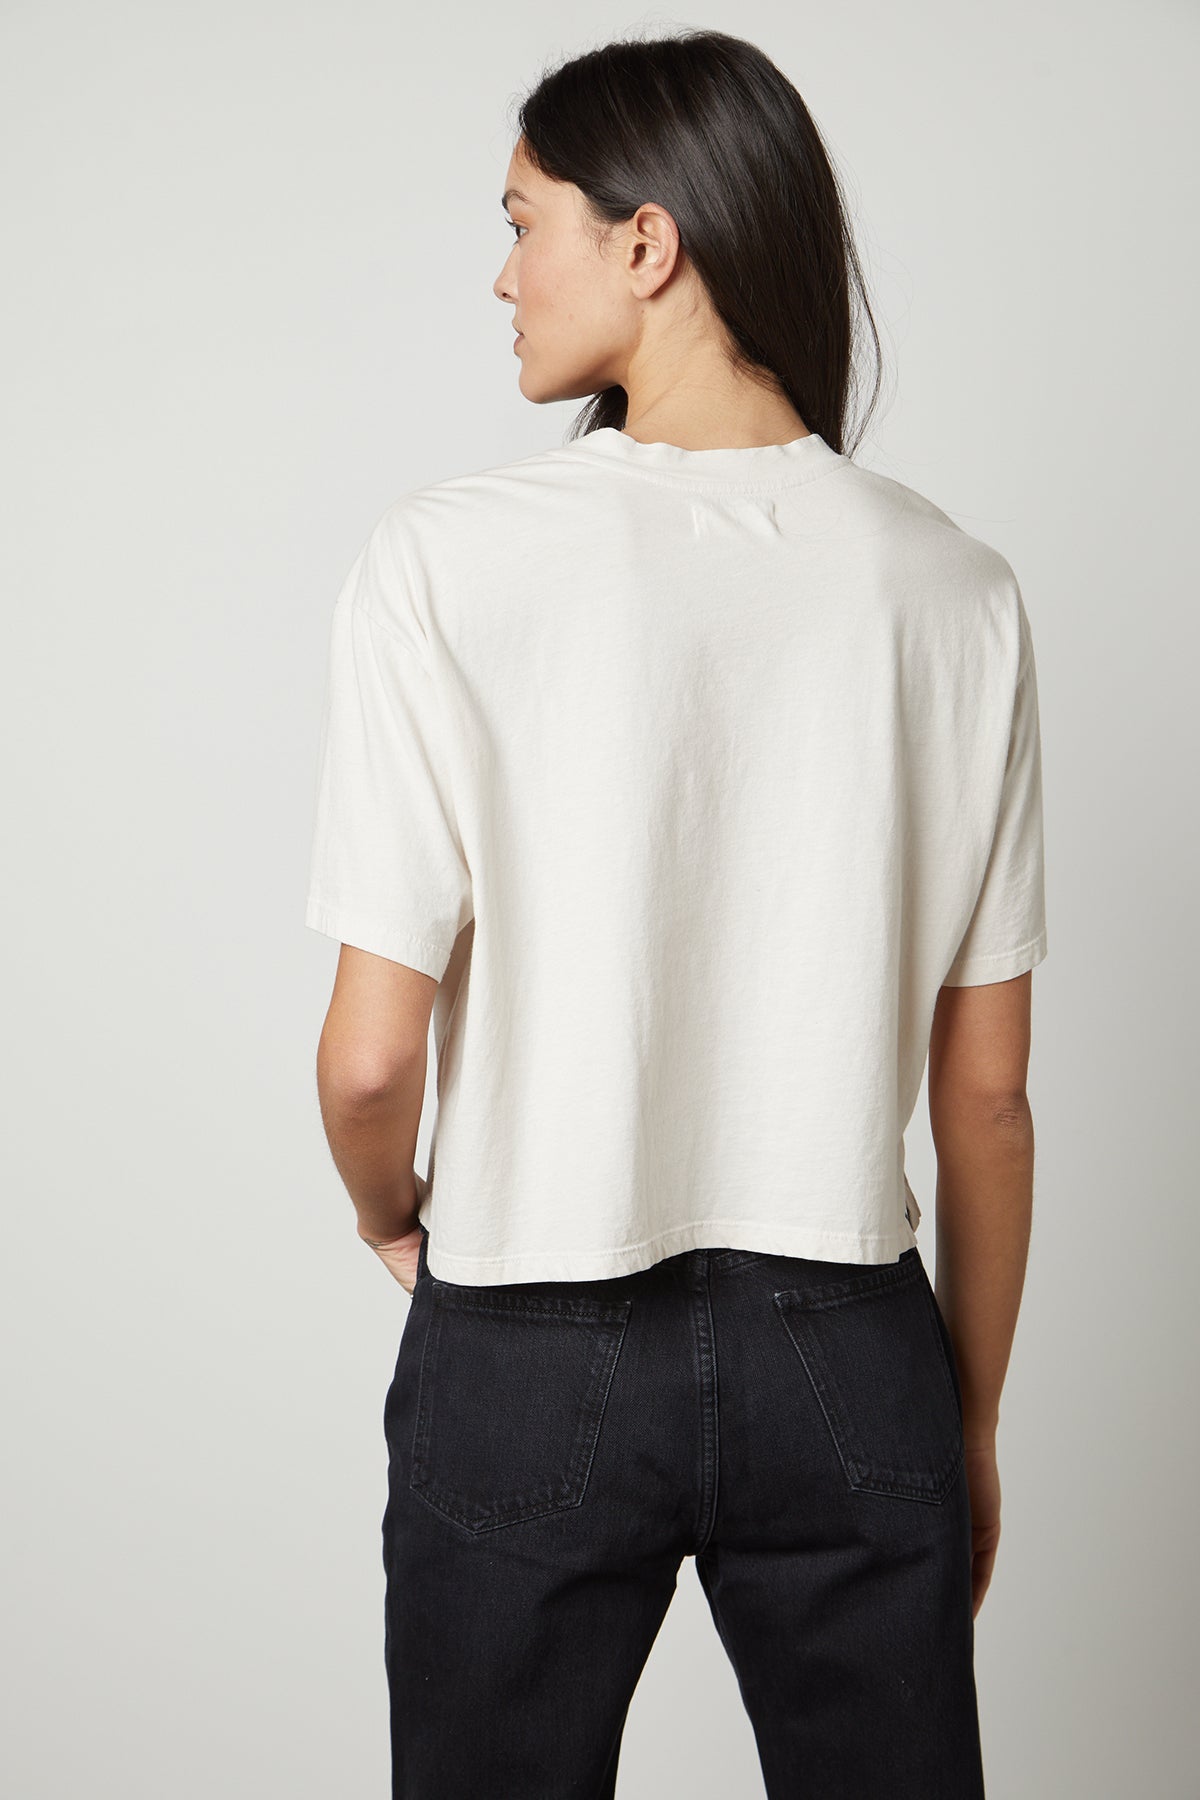 The back view of a woman wearing a Velvet by Graham & Spencer CLARAH CREW NECK TEE.-26799861989569